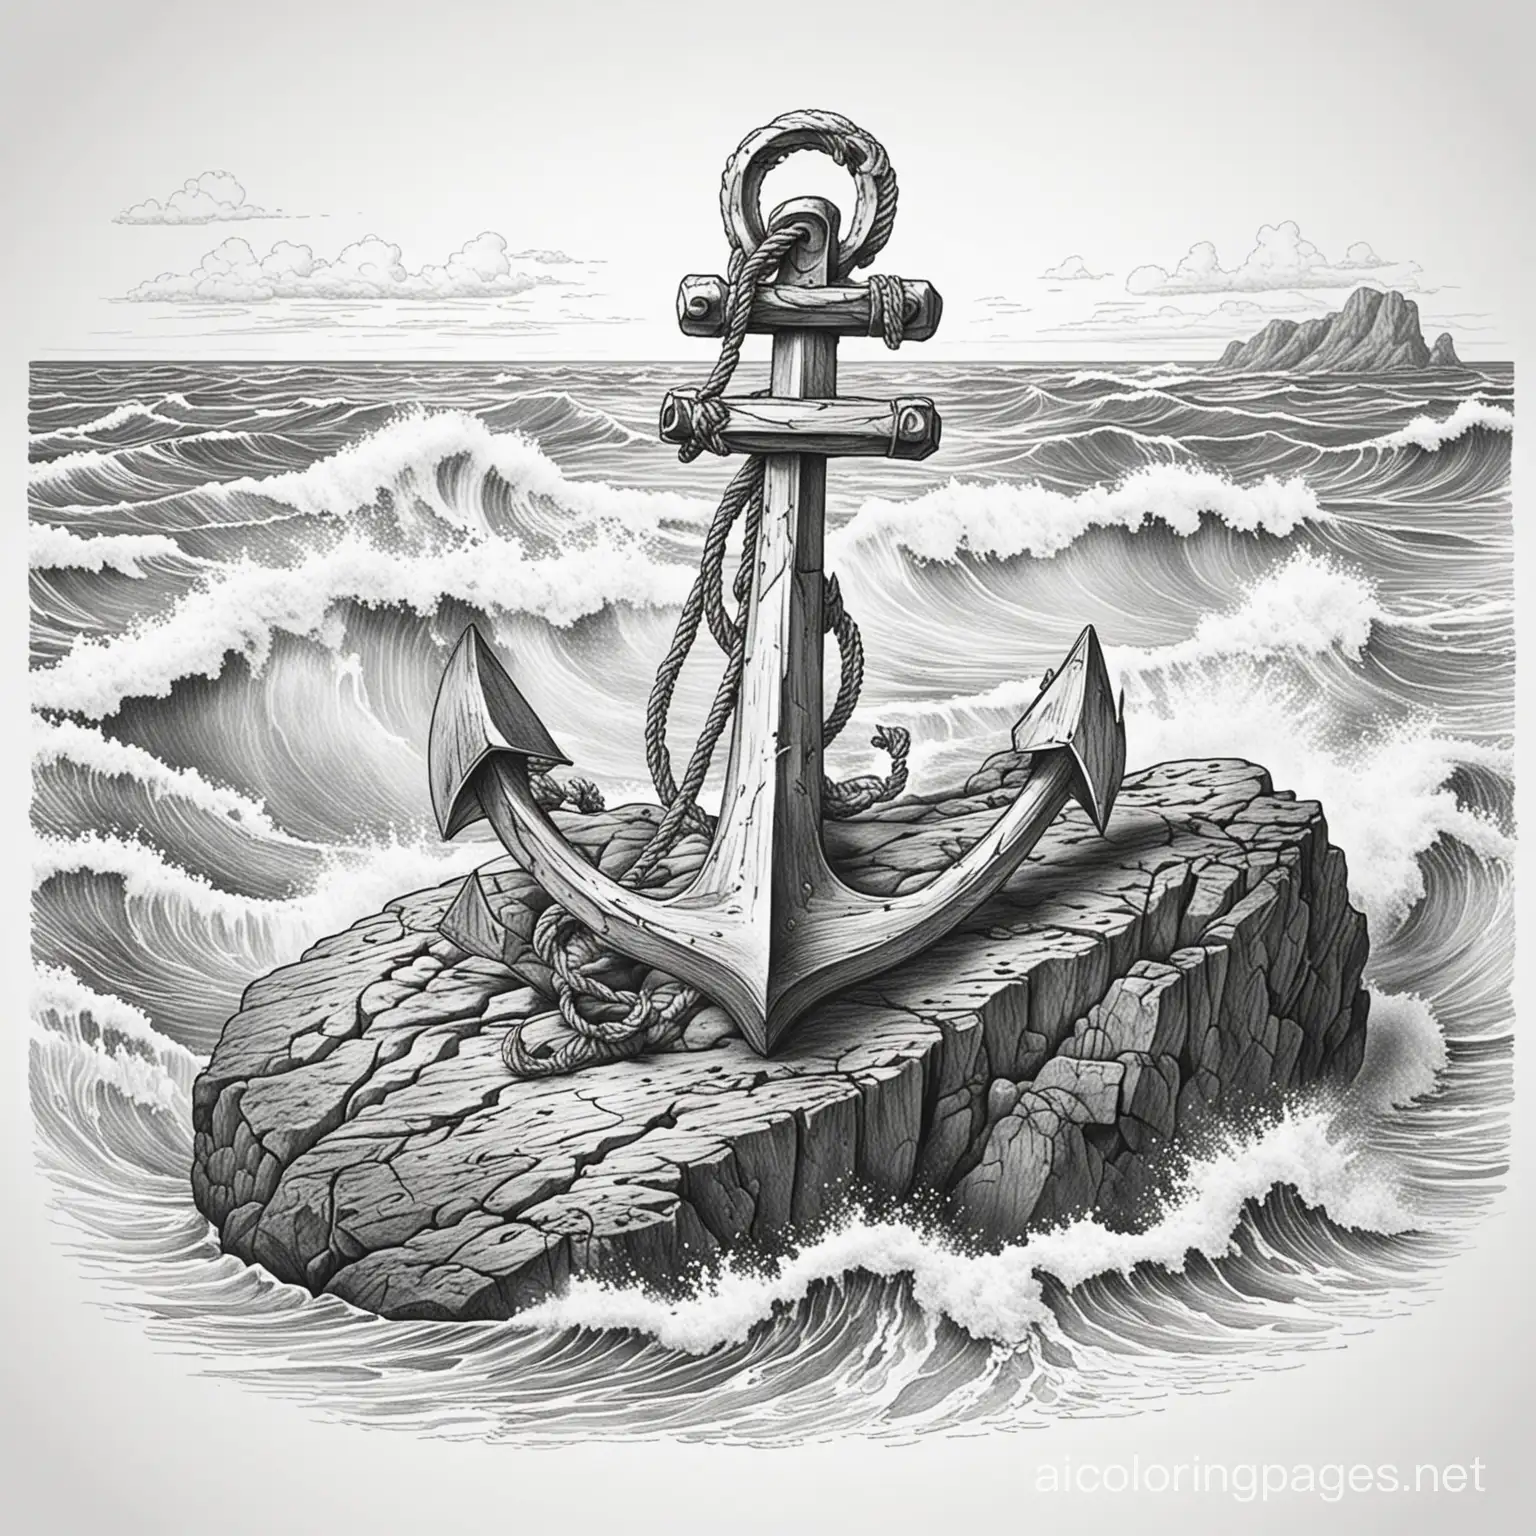 vintage anchor dug into a rock in the middle of raging waves, Coloring Page, black and white, line art, white background, Simplicity, Ample White Space. The background of the coloring page is plain white to make it easy for young children to color within the lines. The outlines of all the subjects are easy to distinguish, making it simple for kids to color without too much difficulty